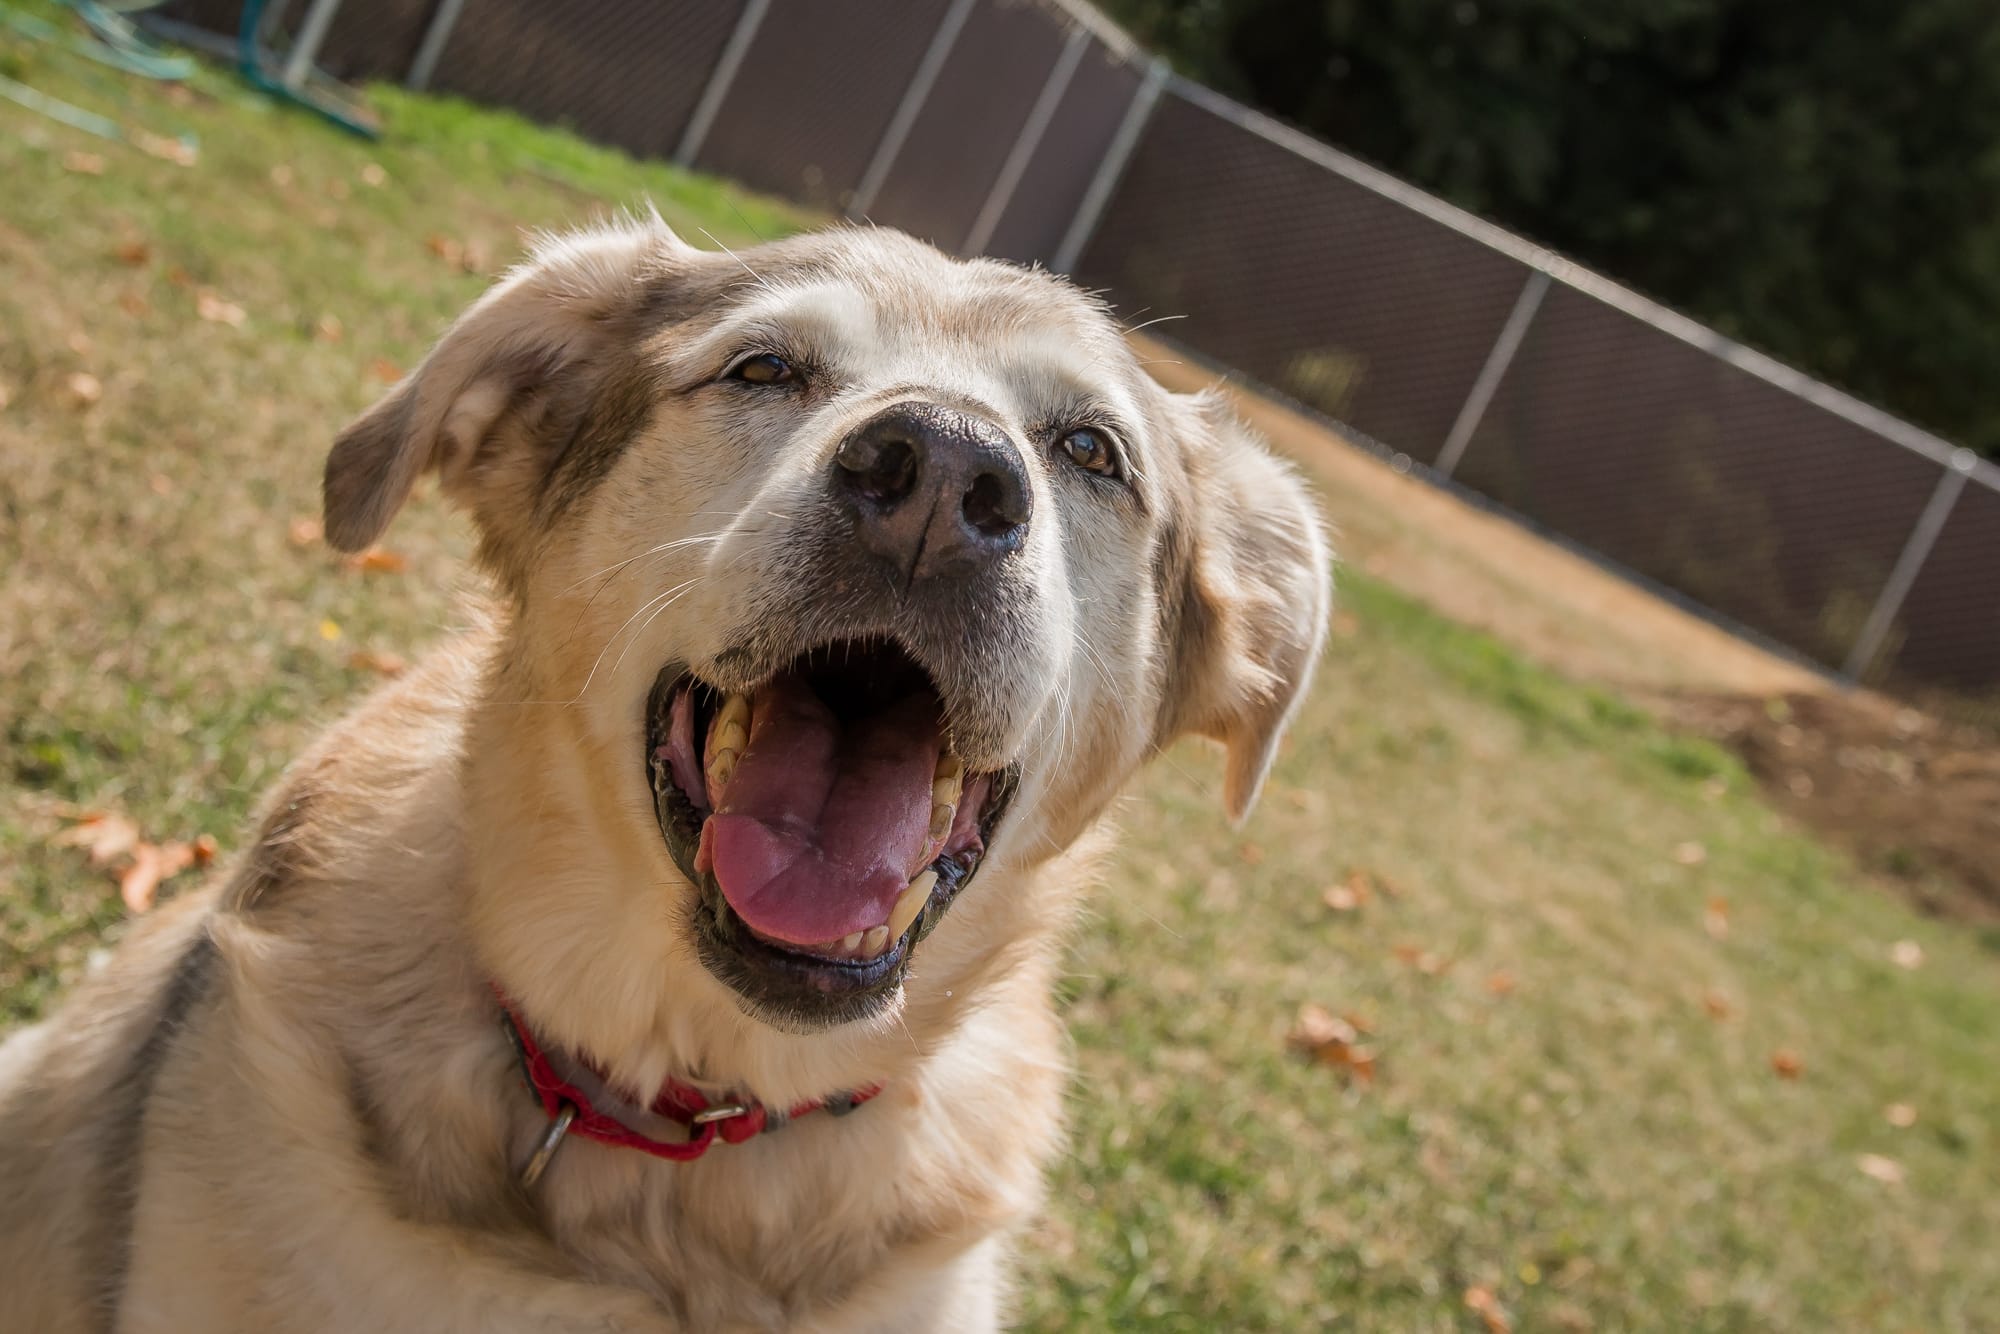 This is Kelsie and she is looking for a place to live out her golden years. She has plenty of energy and likes to play. Kelsie adores people and would like to meet any kids or dogs with whom she may be living. Adopt her today!